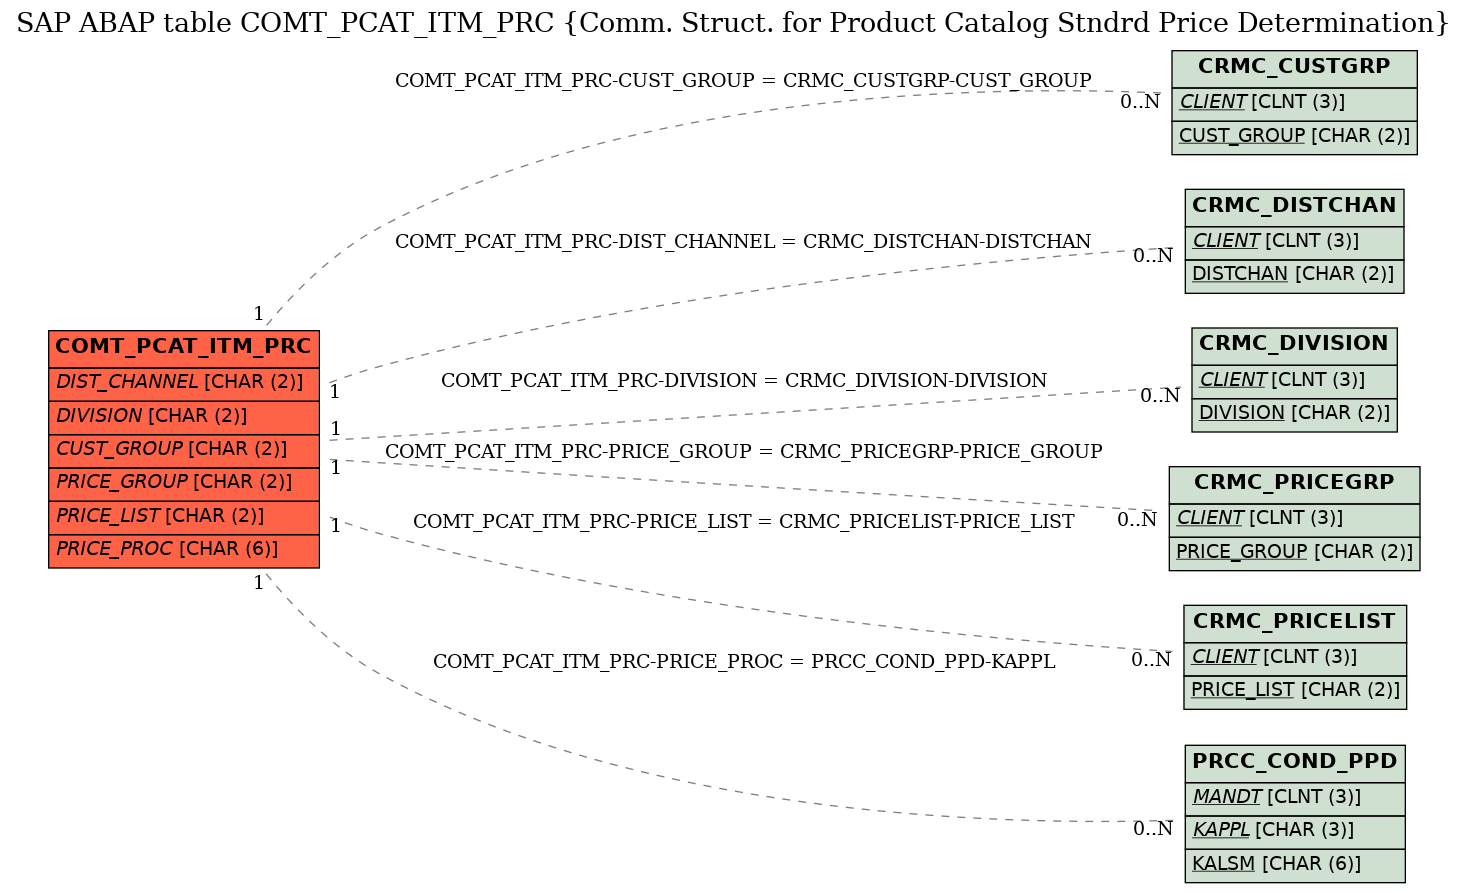 E-R Diagram for table COMT_PCAT_ITM_PRC (Comm. Struct. for Product Catalog Stndrd Price Determination)